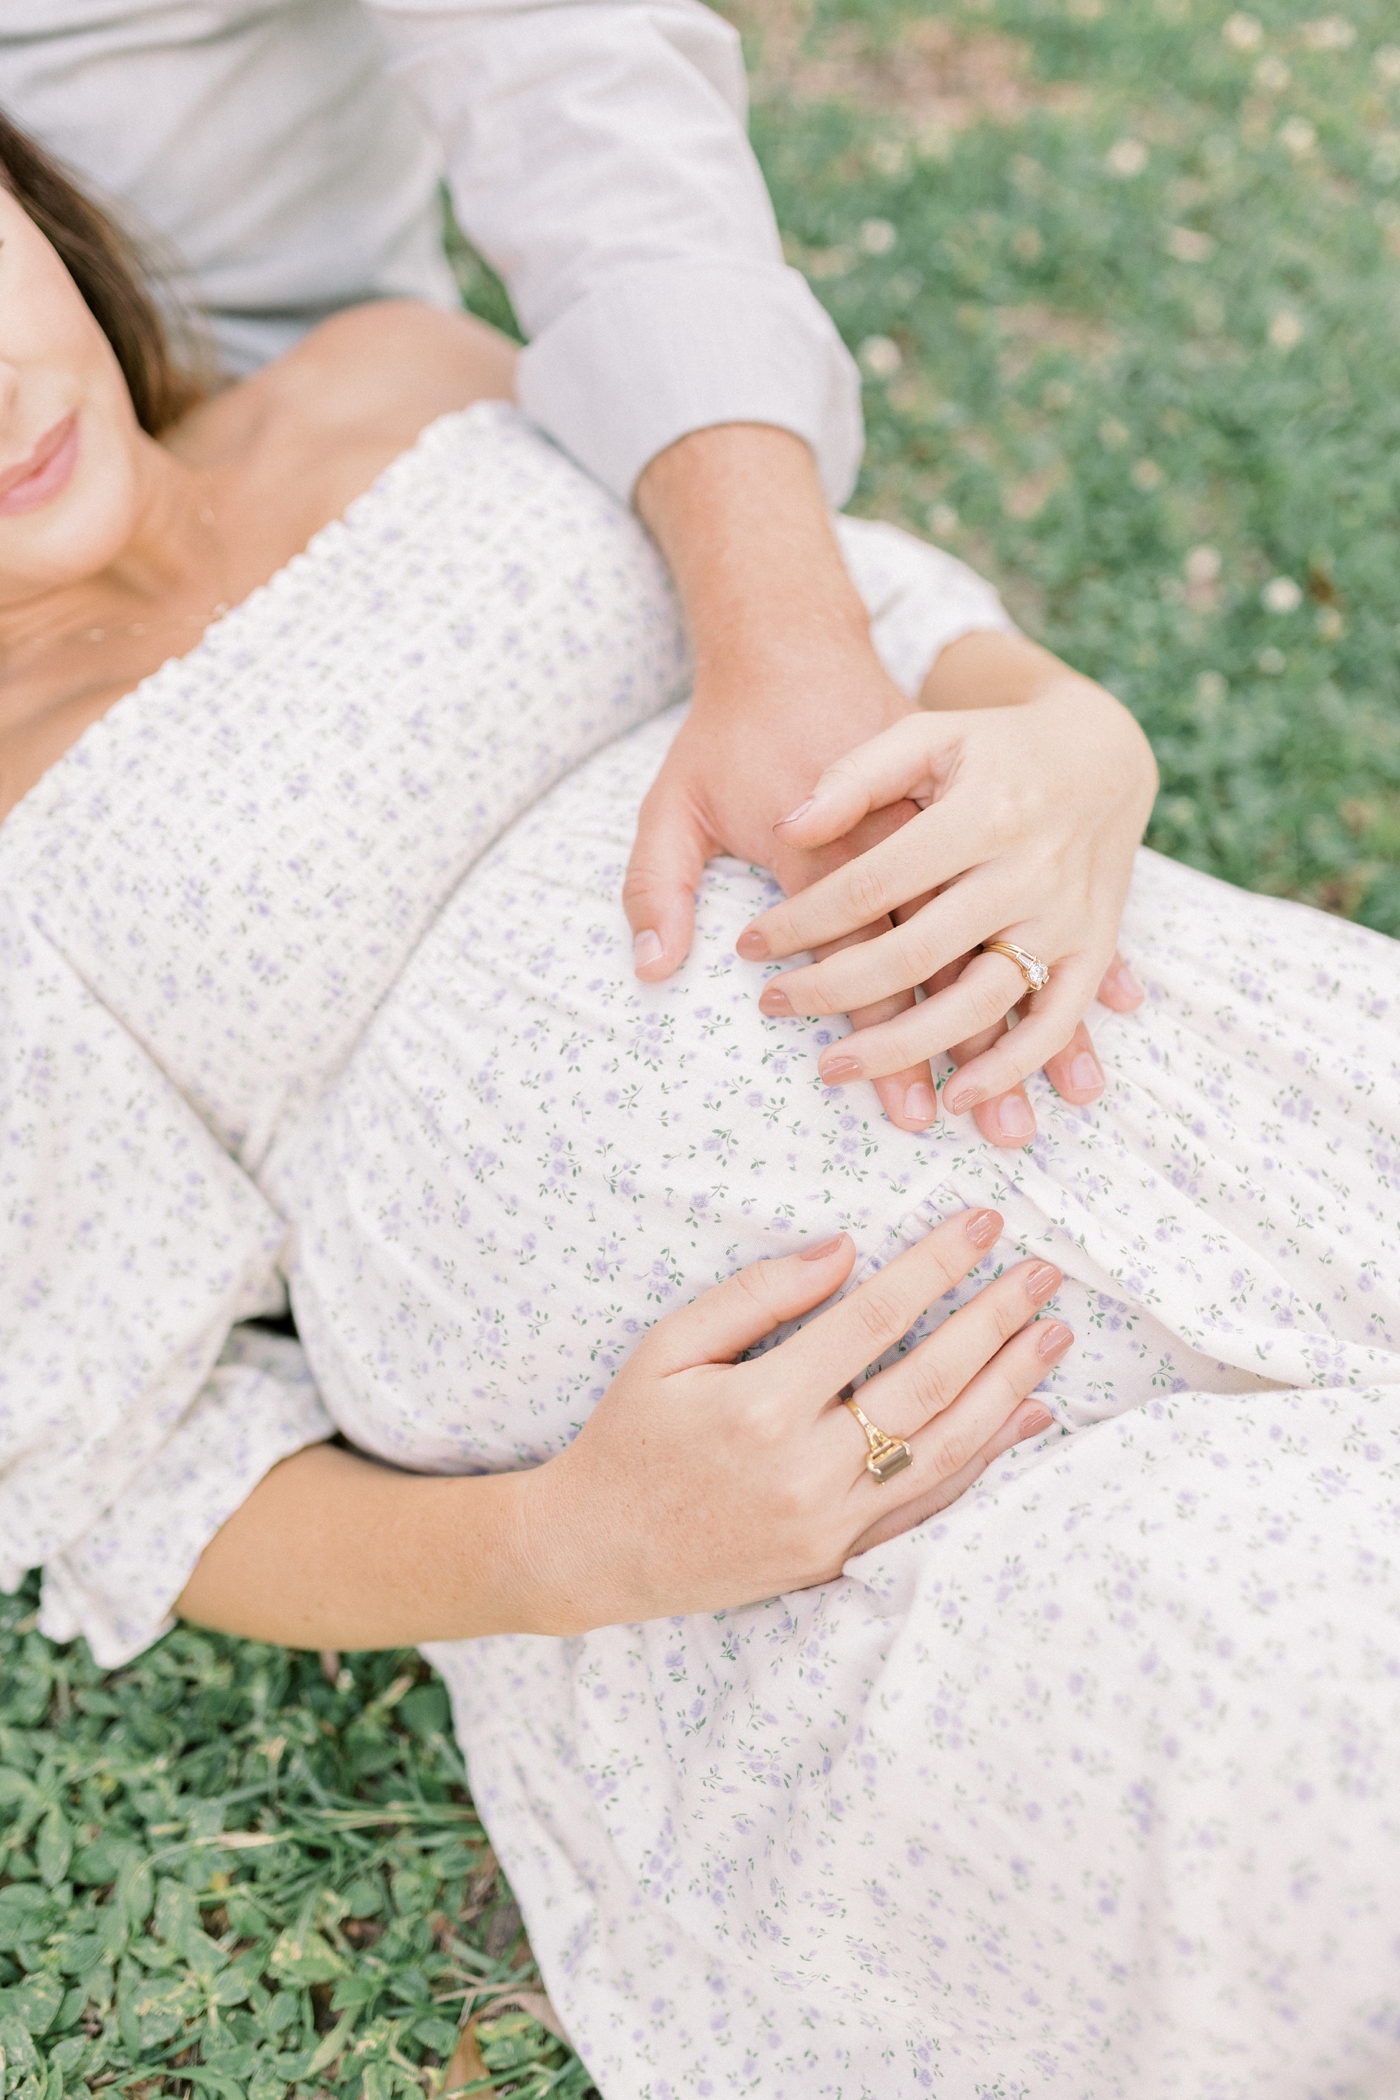 Detail of hands on mom's belly | Photo by Caitlyn Motycka Photography.